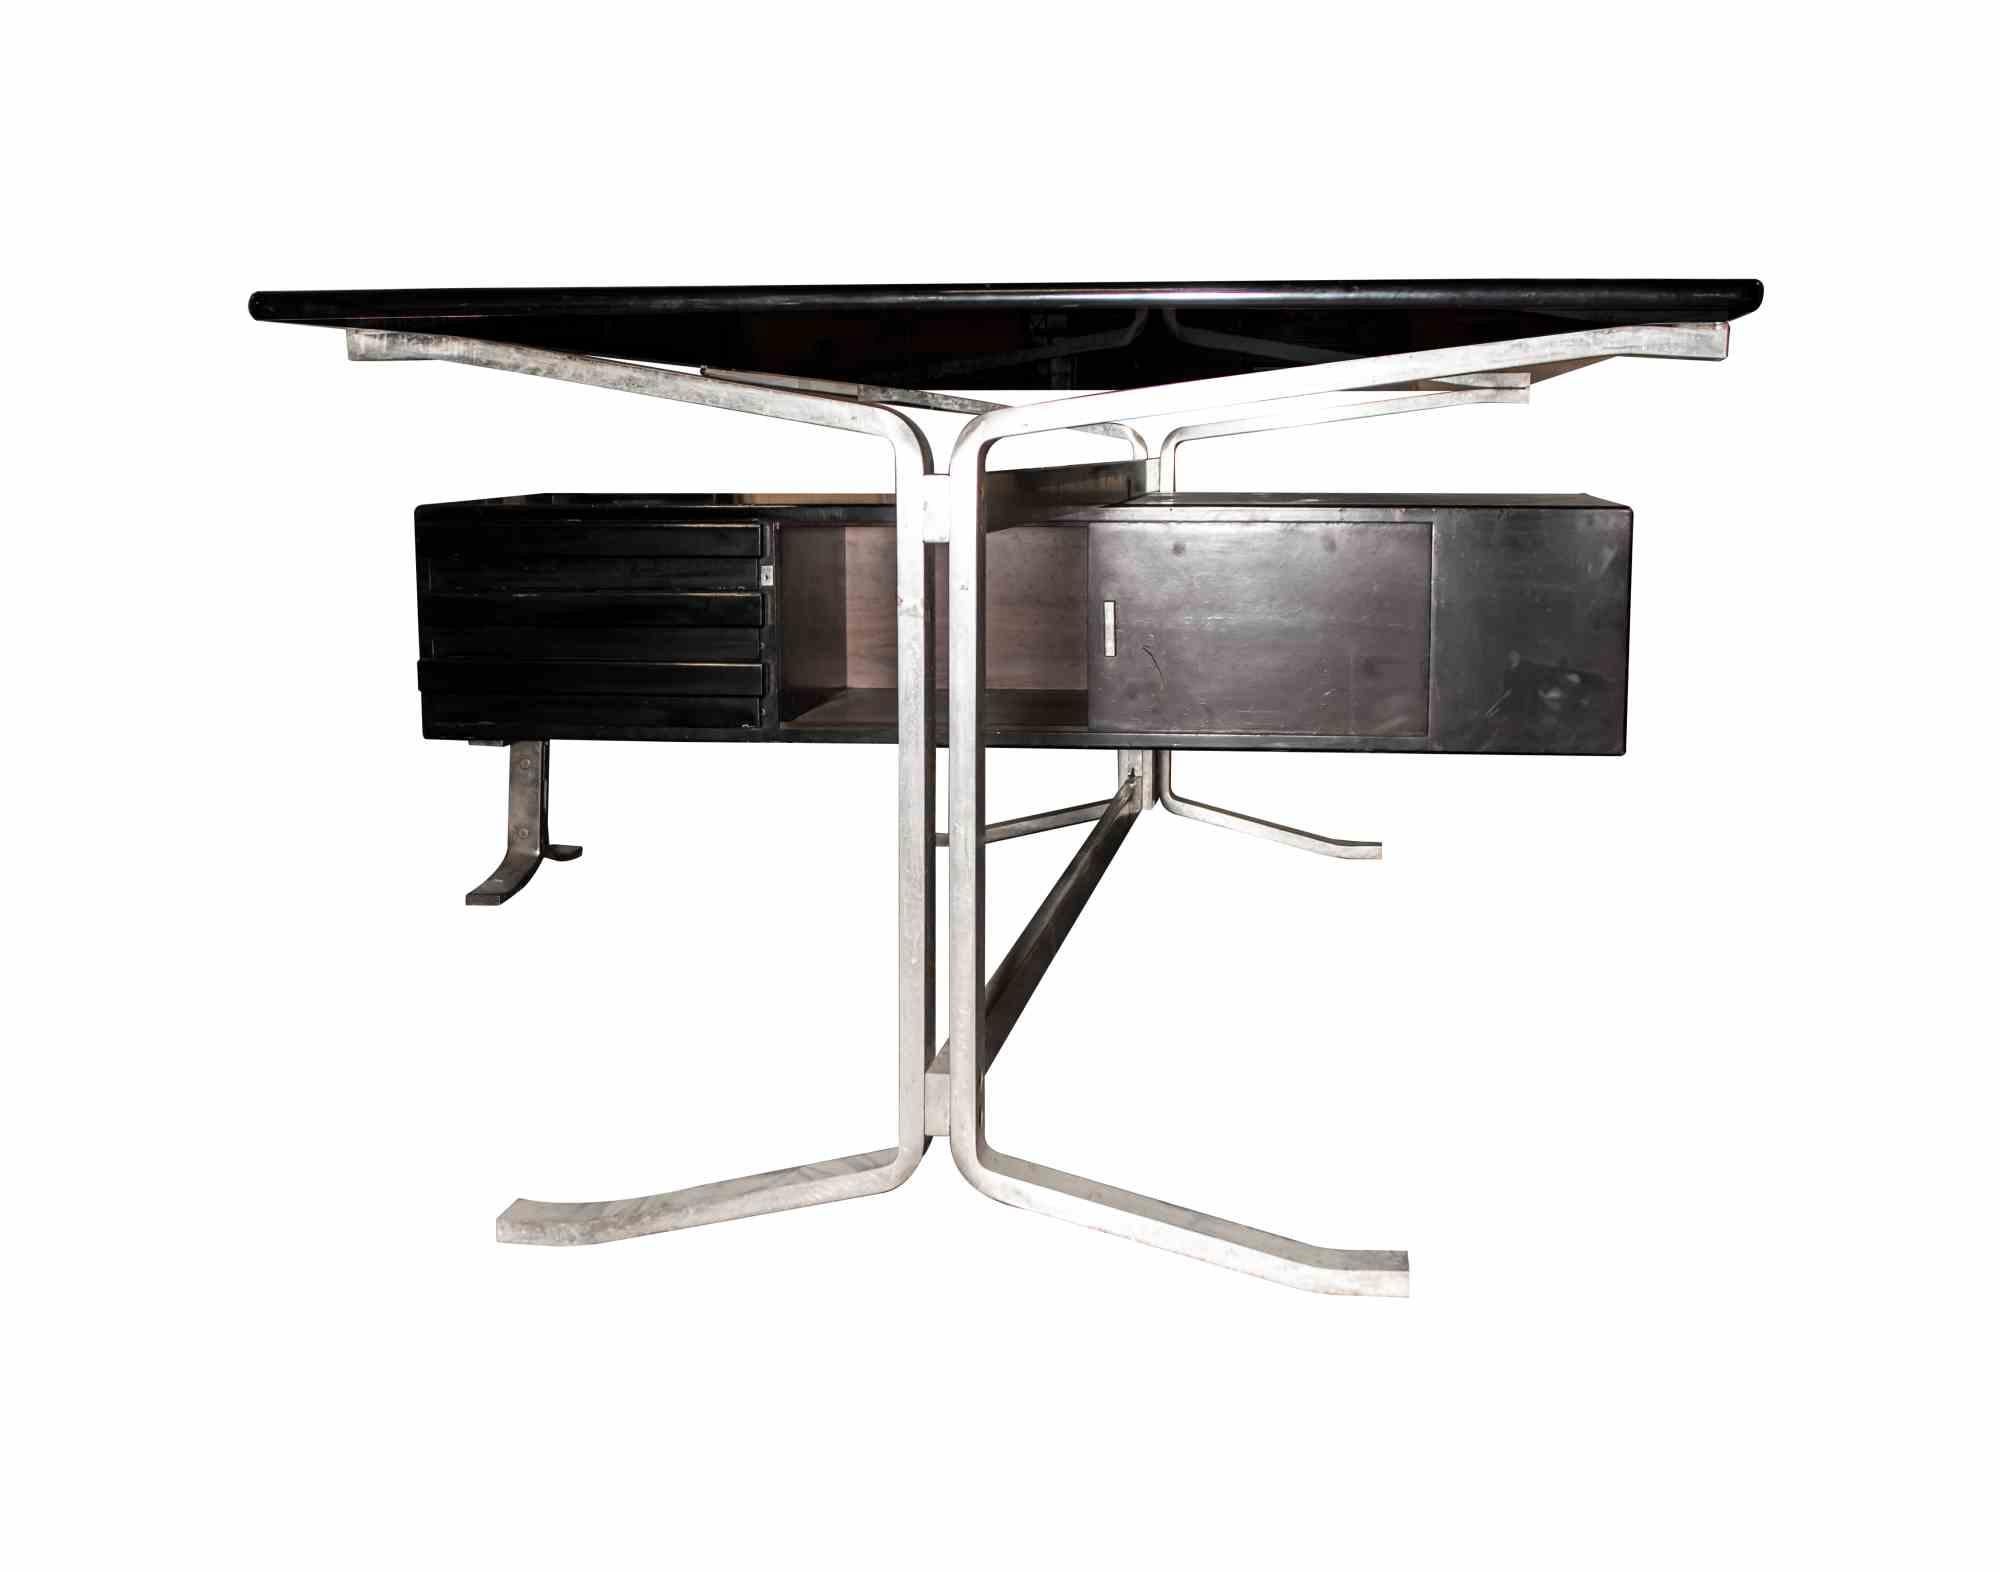 Vintage angle desk is an original design furniture item realized in the 1965 ca. by Gianni Moscatelli for Formanova.

Black lacquered wood and legs in brushed chromed metal. Top in glass.

Dimensions of the angle desk: 56 x 62 x 62 cm

Mint